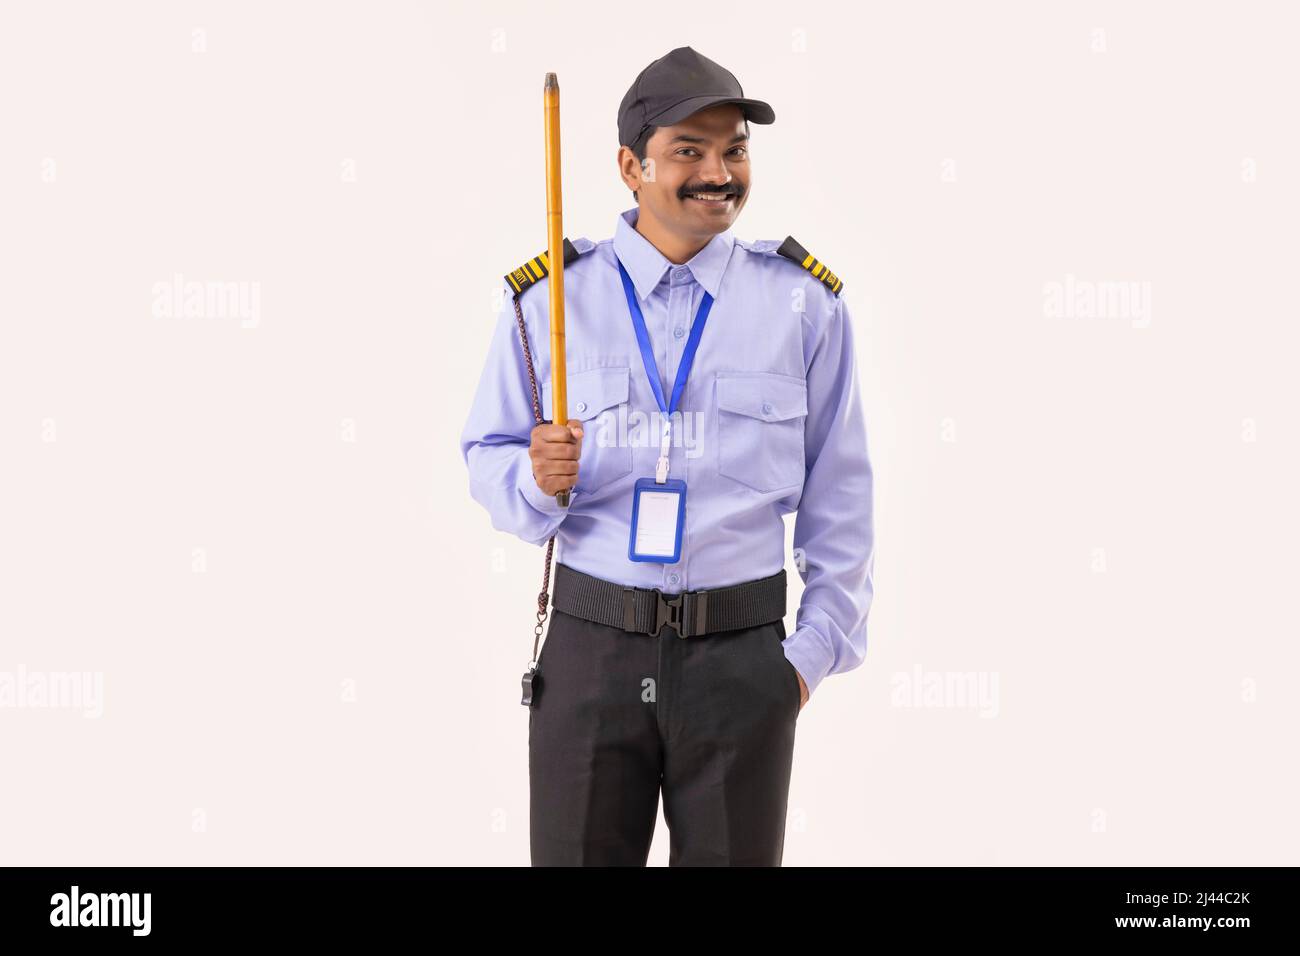 Portrait of Security guard standing with stick in his hand Stock Photo